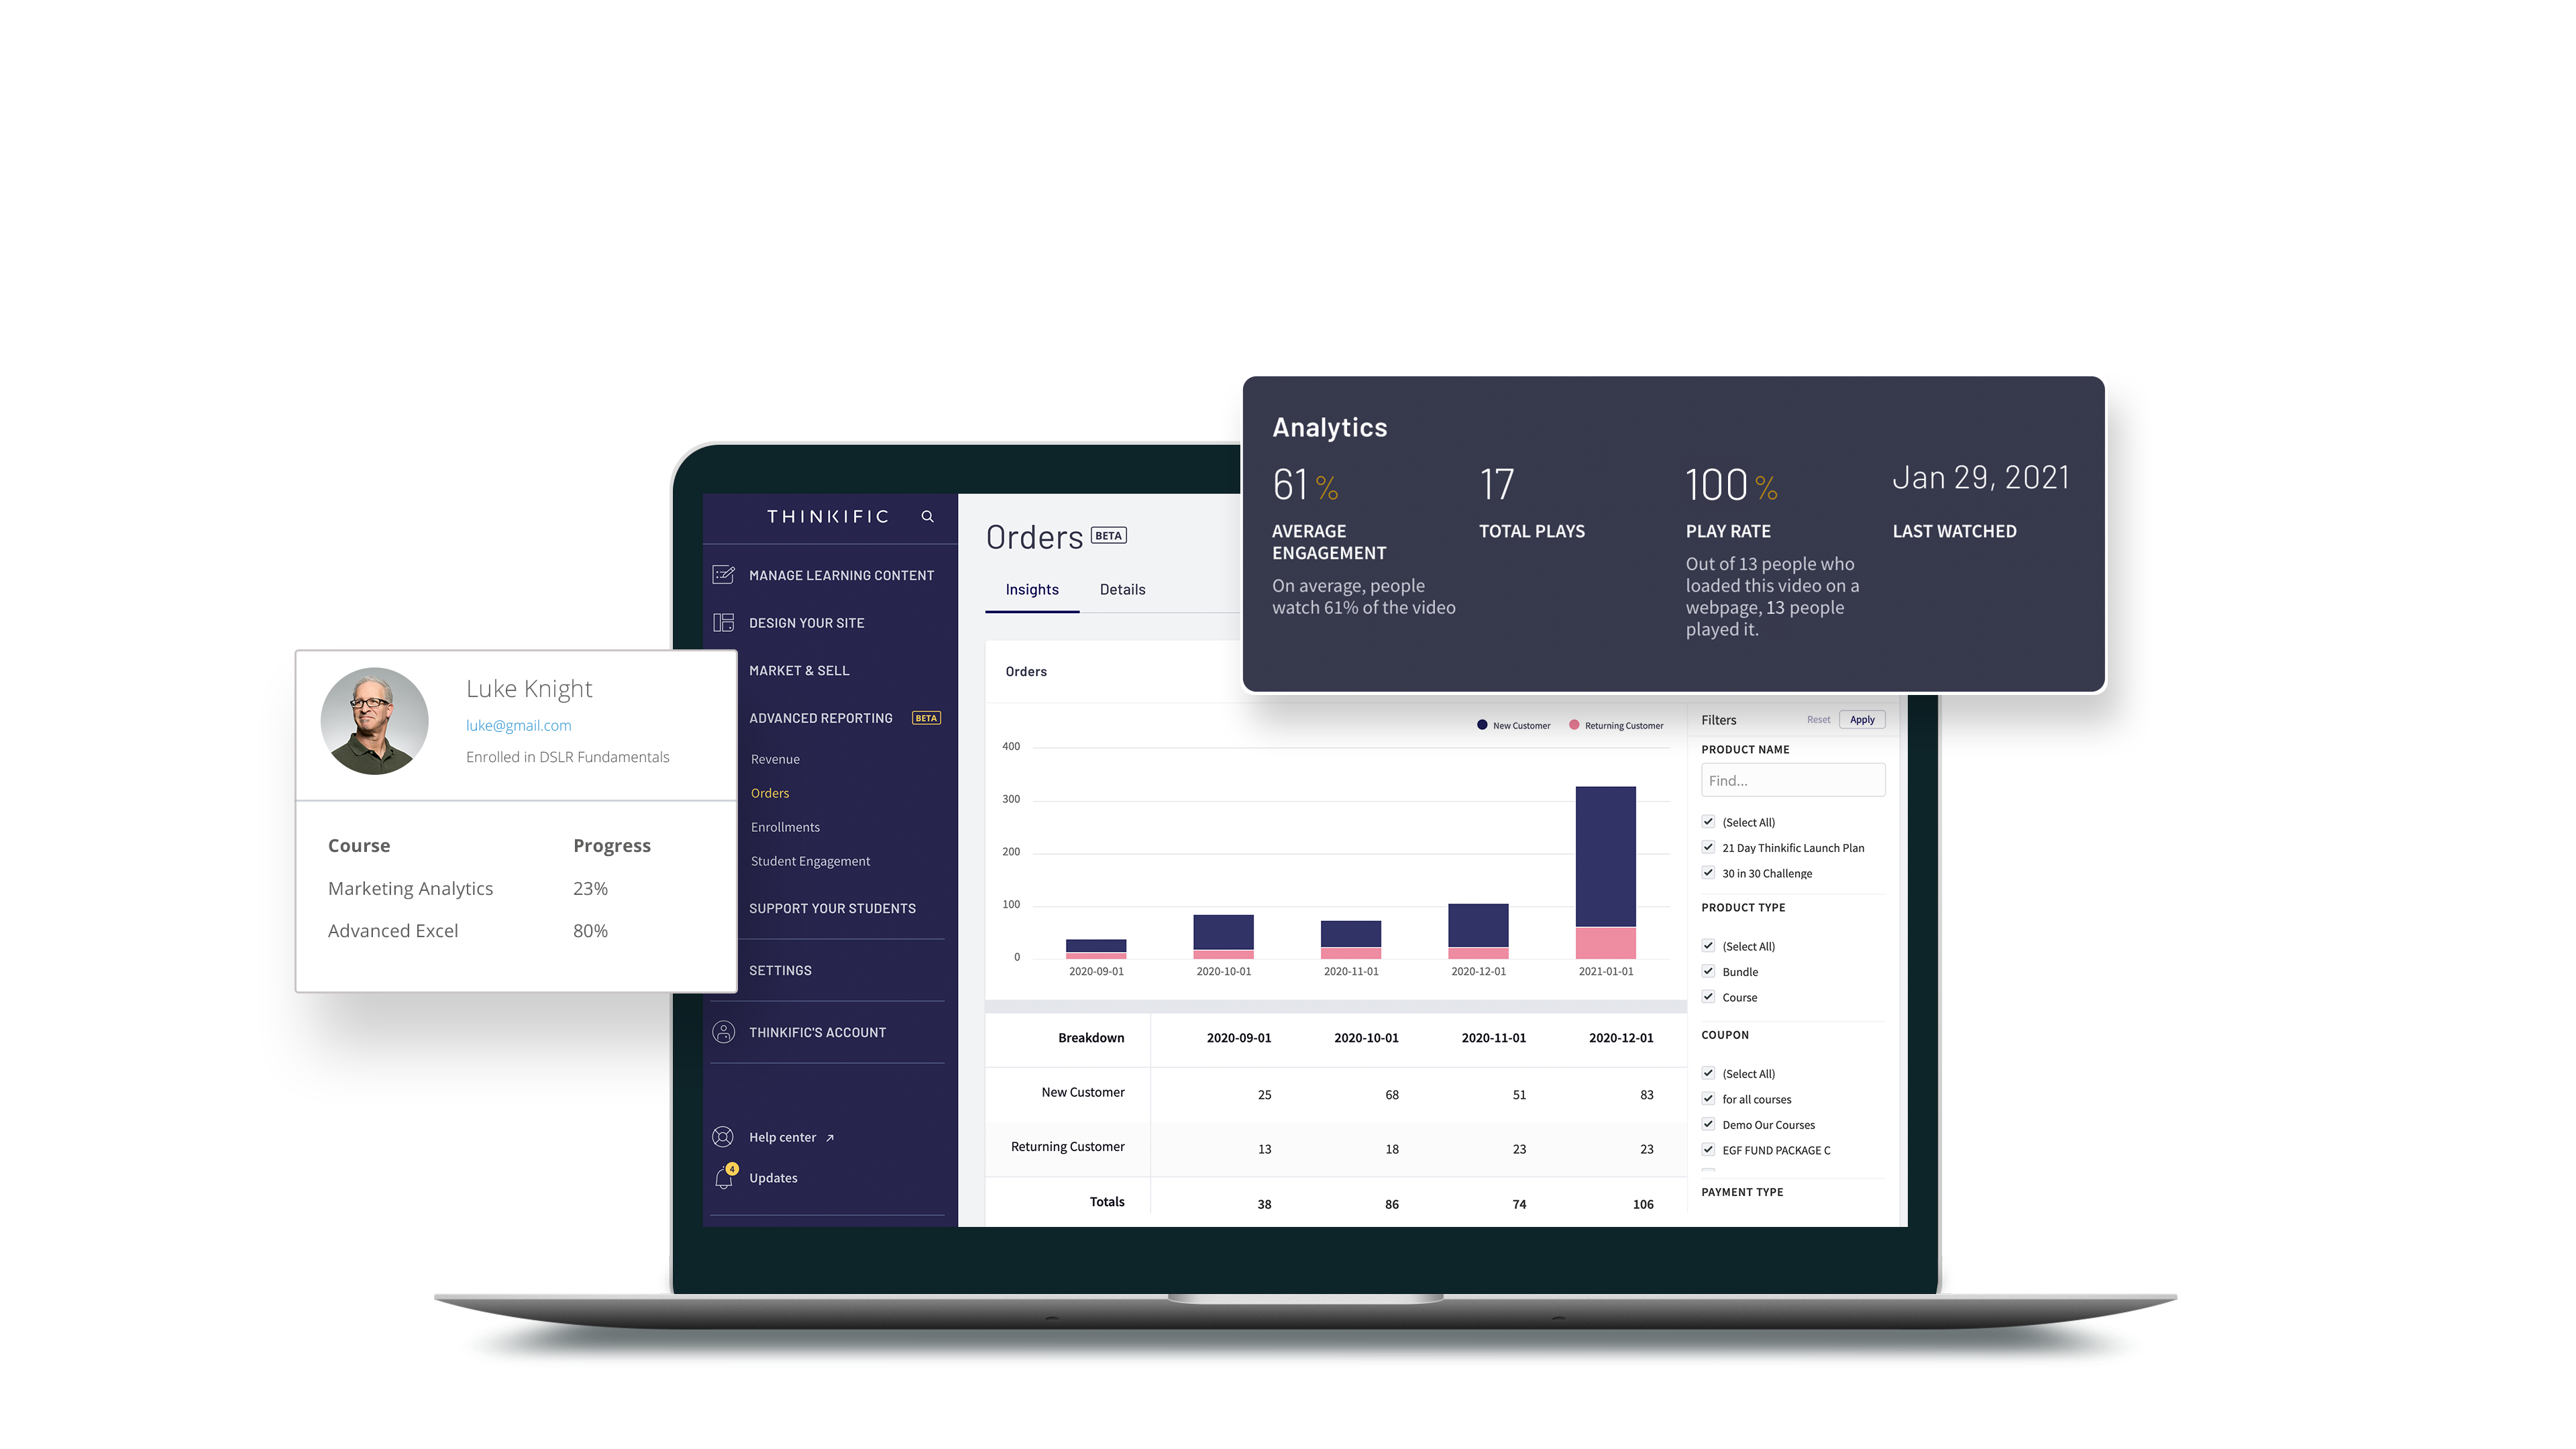 Thinkific Advanced Reporting gives you deeper insights on your business so you can make smart decisions quickly. You can analyze everything from which course is bringing in the most revenue, transactions from new students versus existing students and more